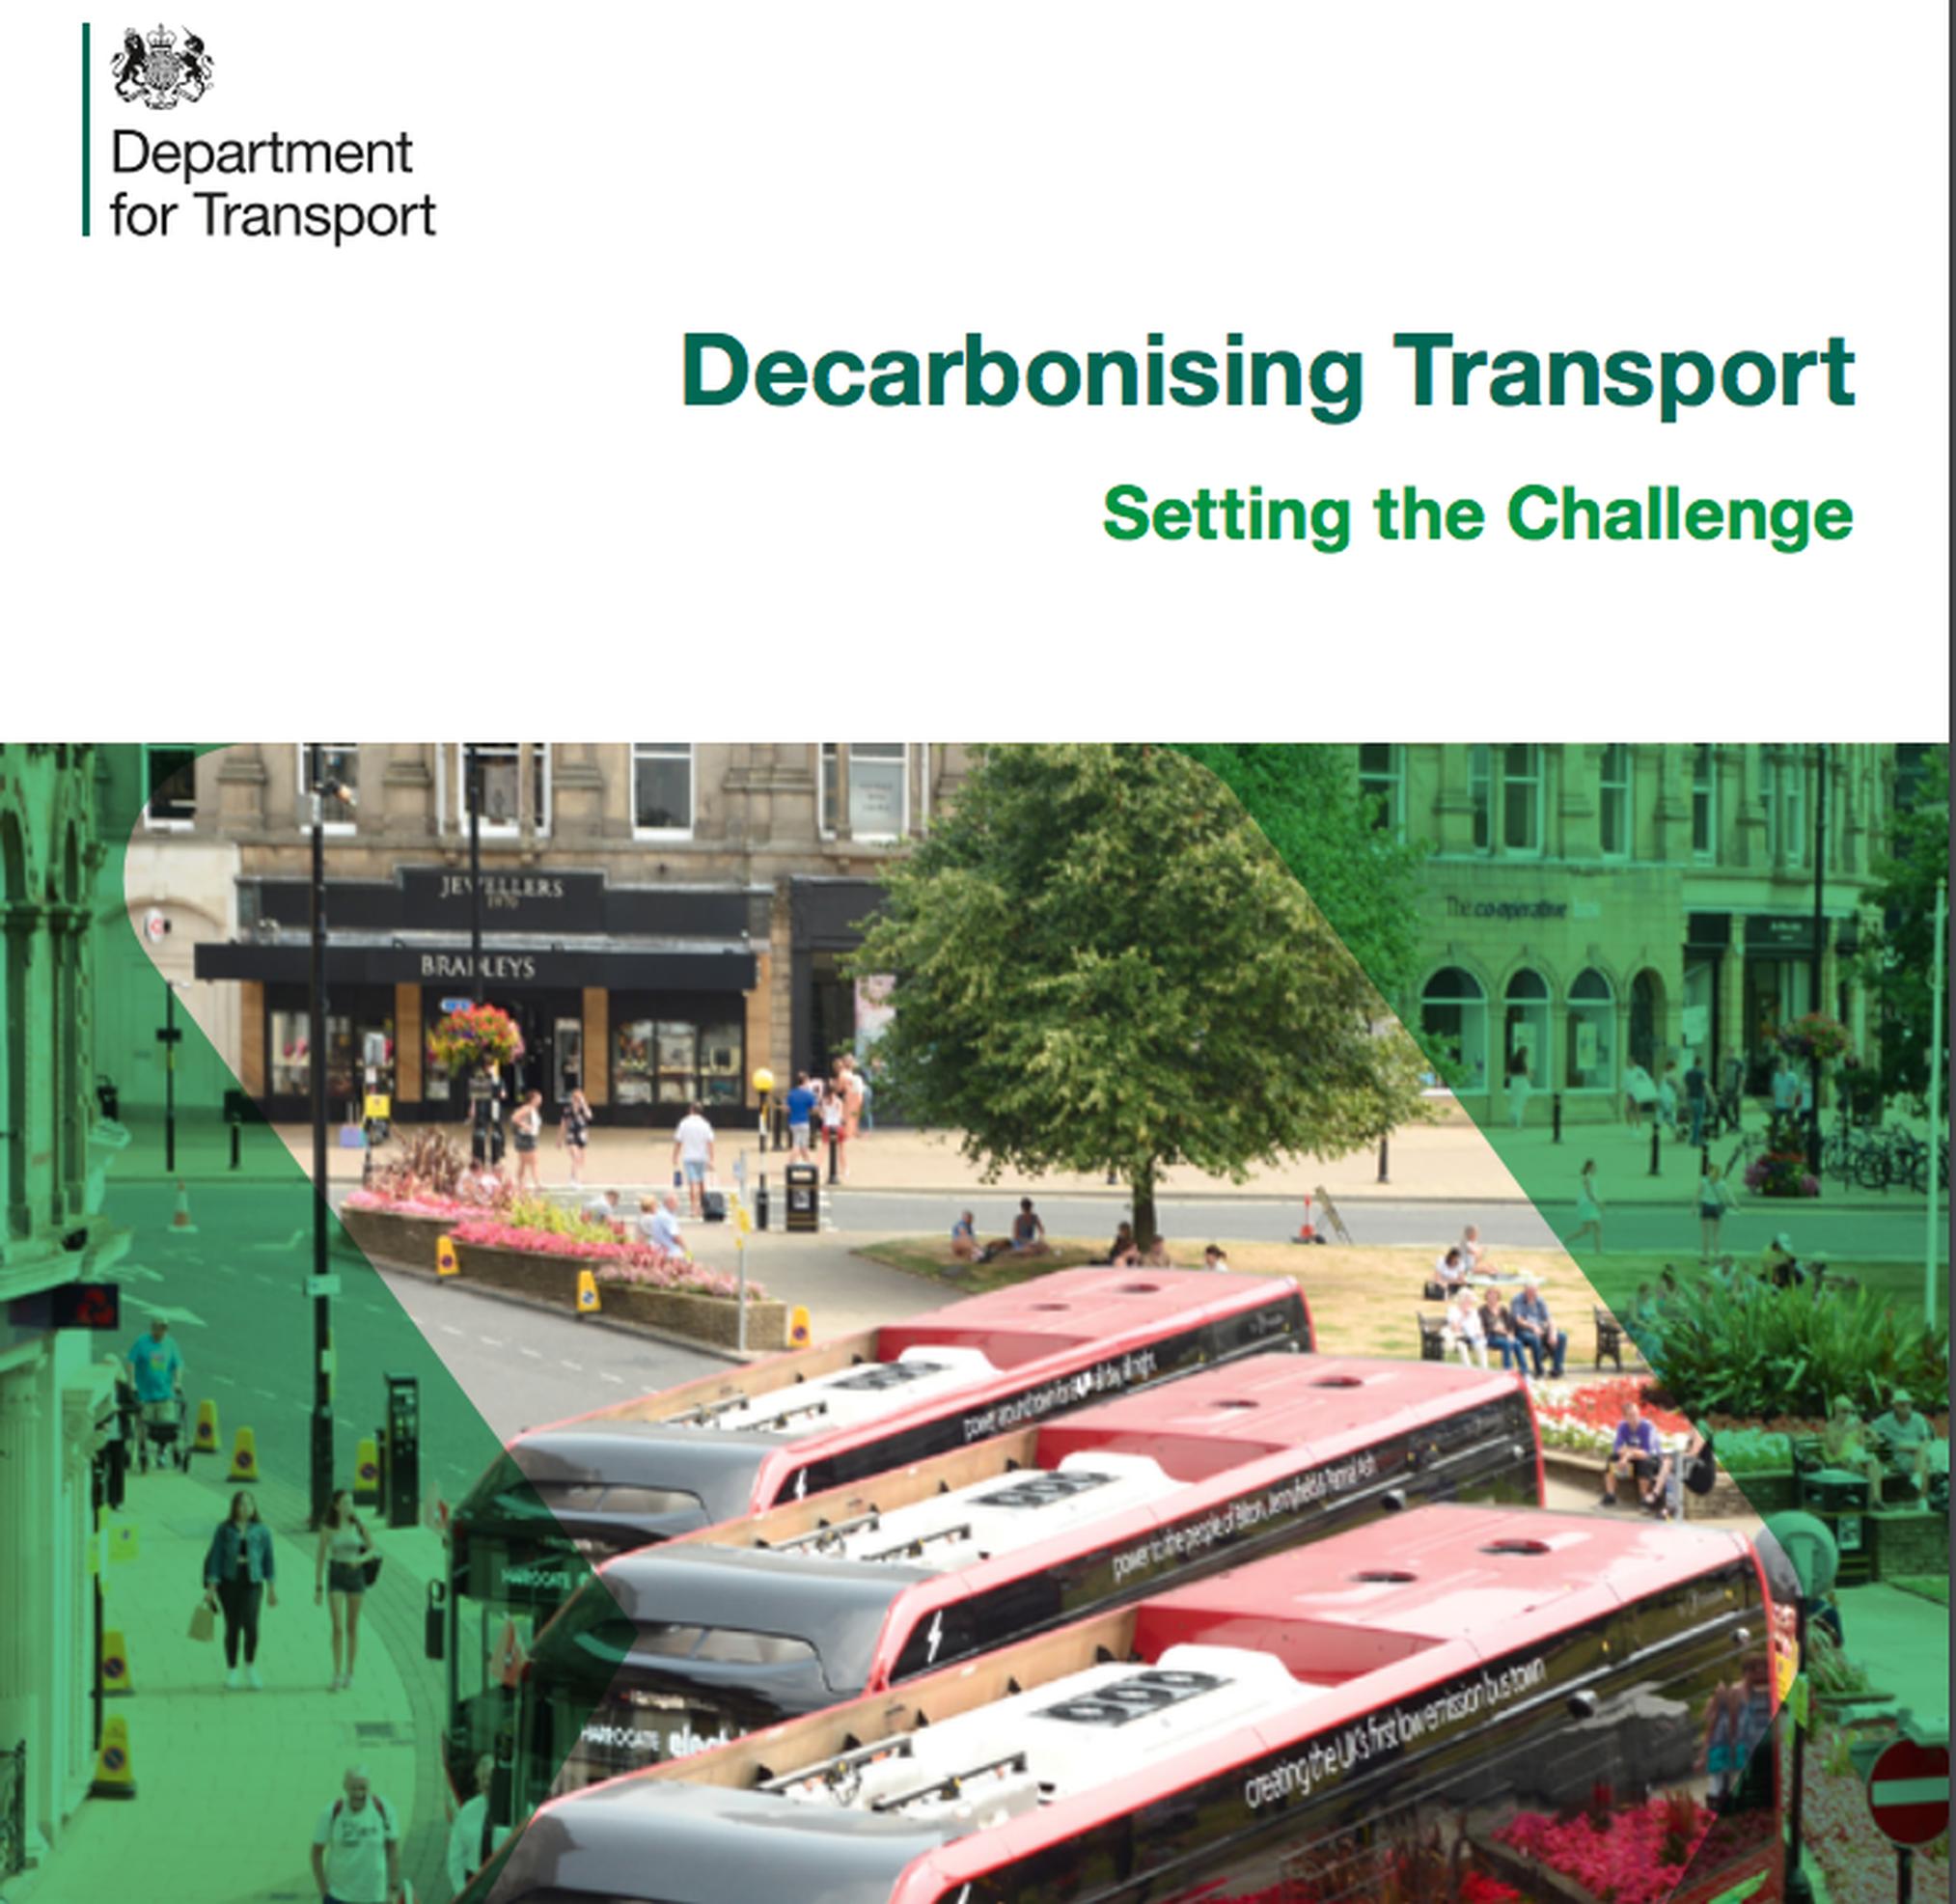 The Department our Transport`s transport decarbonisation plan is a step in the right direction